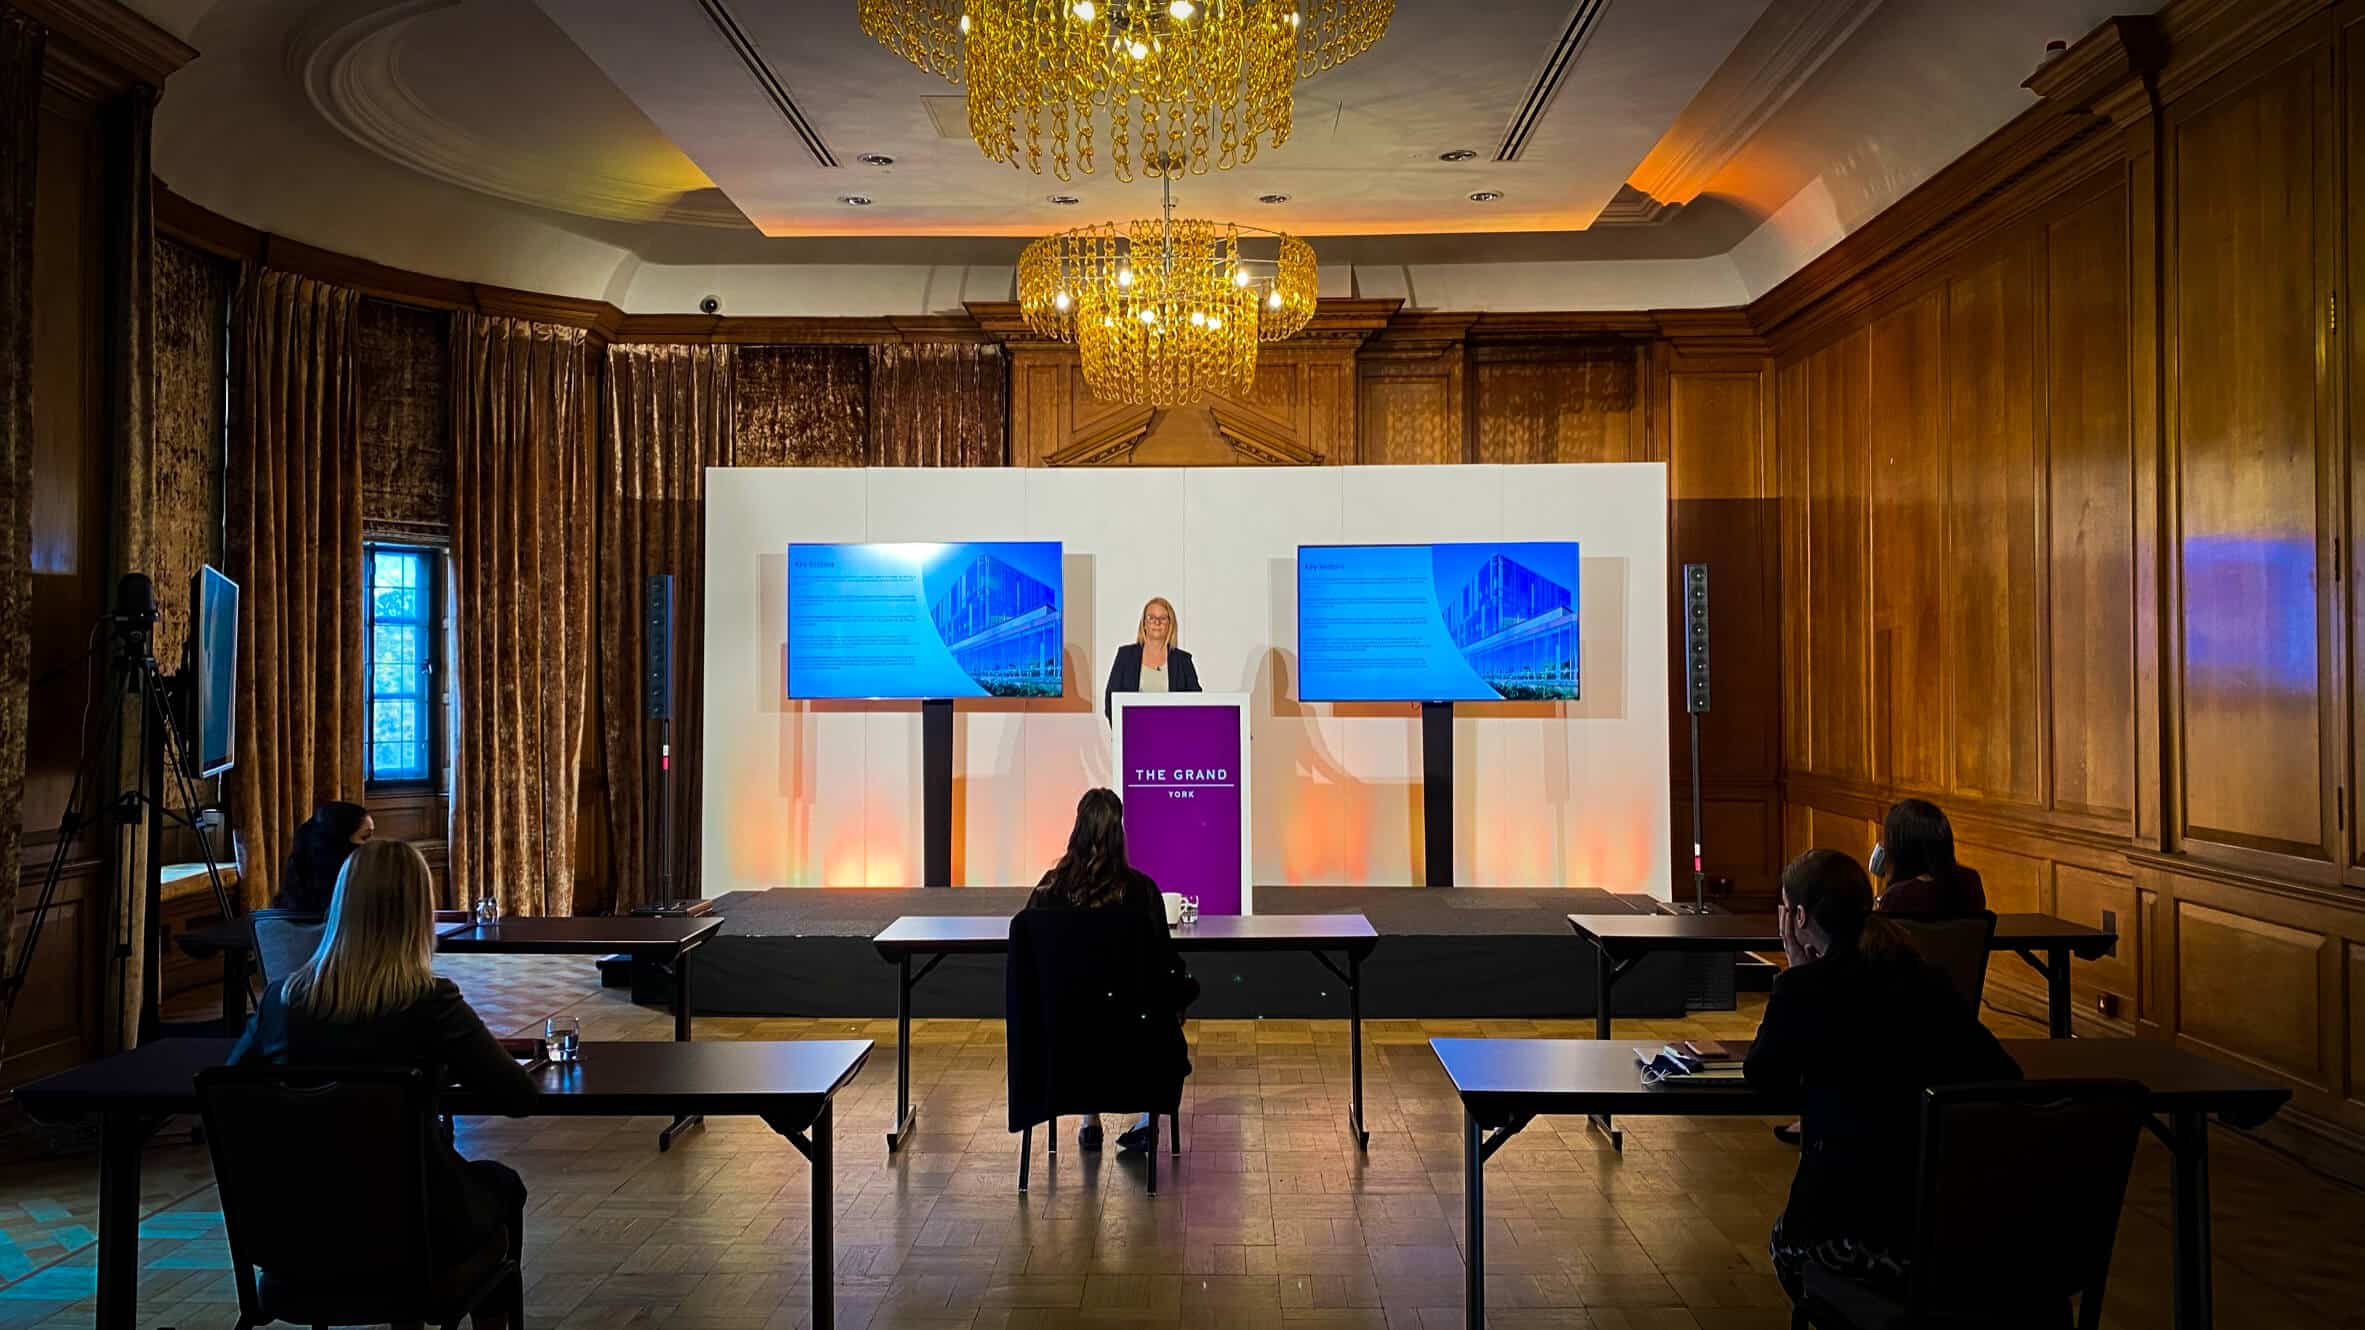 Hybrid event equipment including camera, lighting and screens provided for a conference at York Grand Hotel